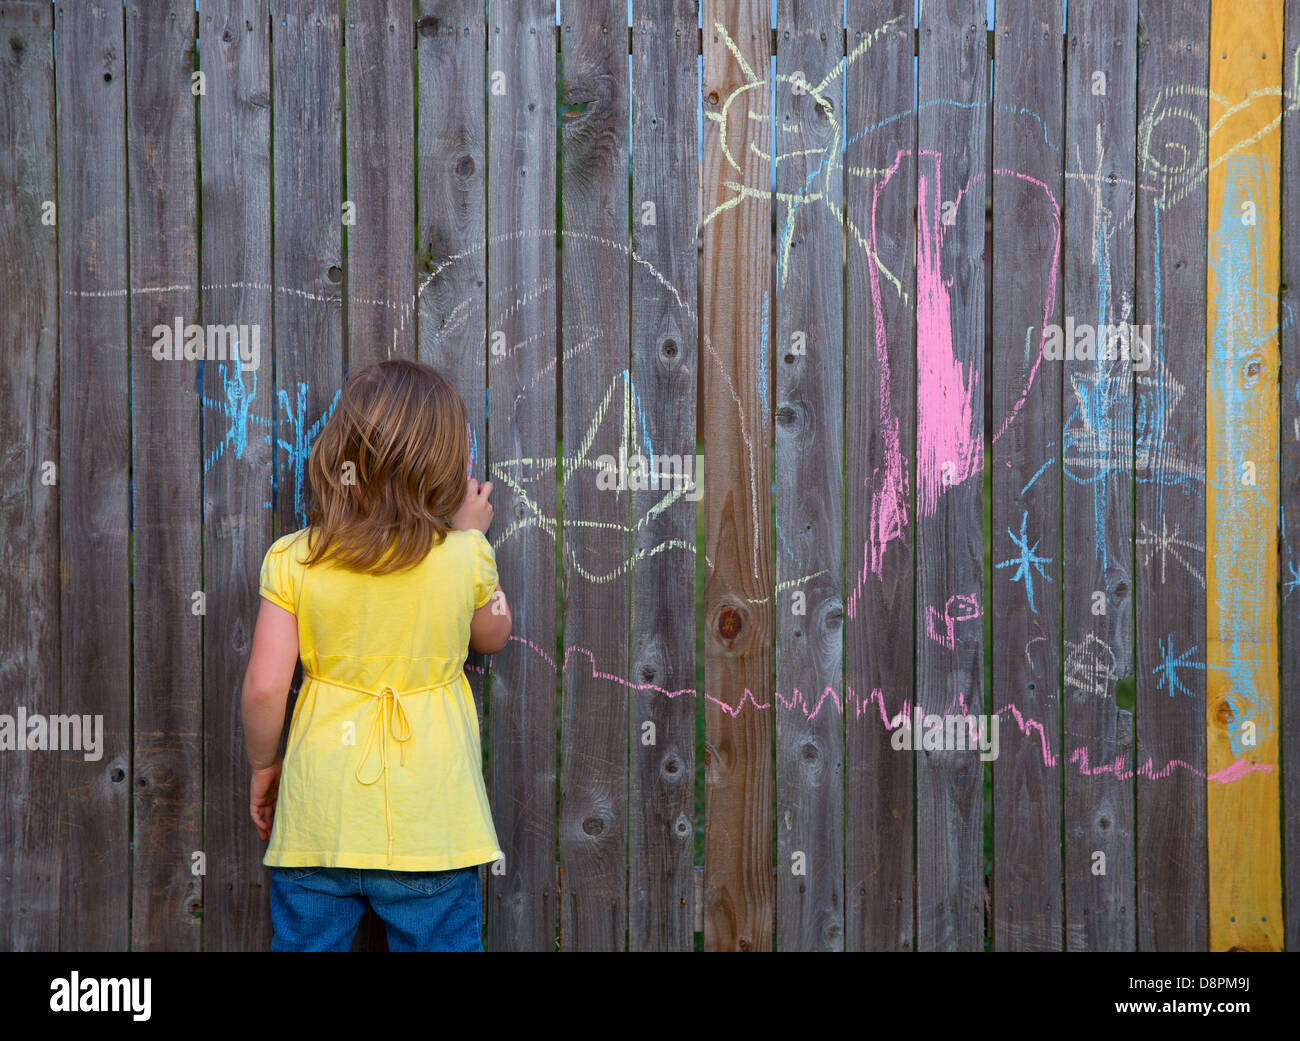 Blonk kid girl playing with drawing chalks in the backyard wooden fence Stock Photo